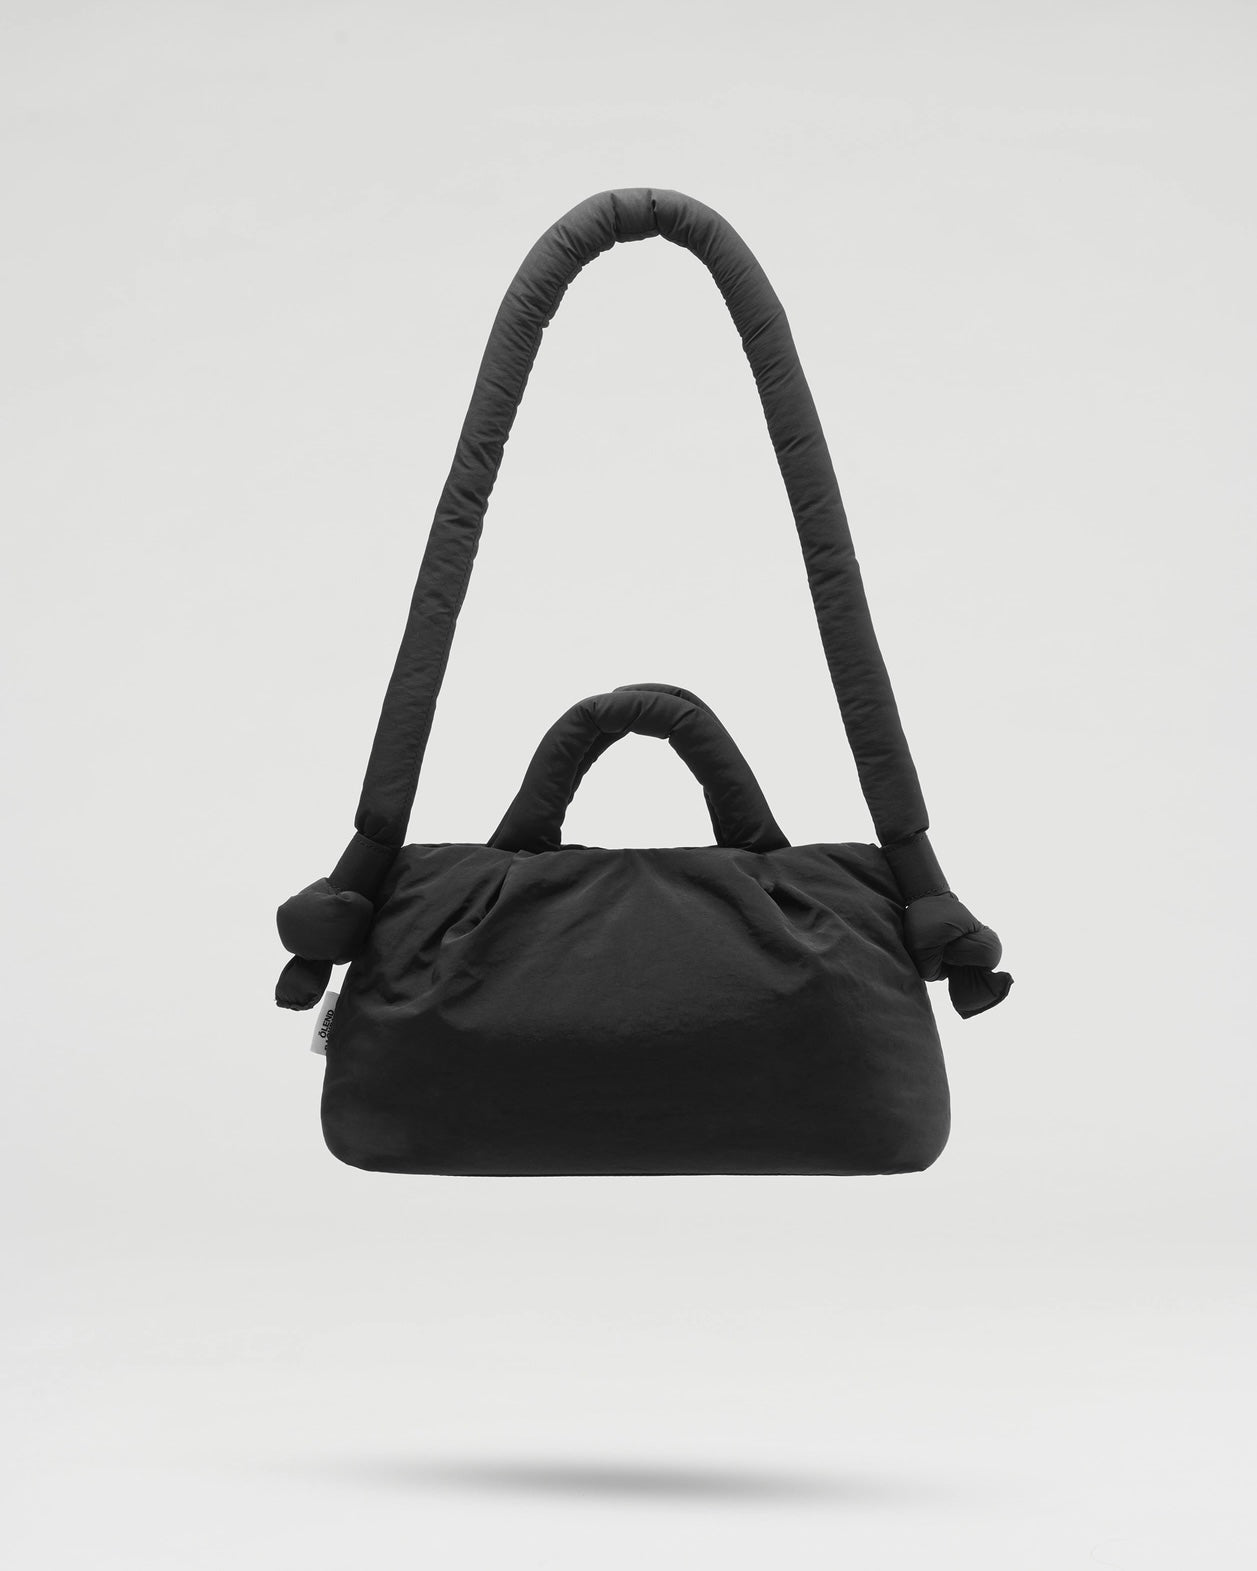 the Ölend Mini Ona Soft Bag in black floating against a neutral background